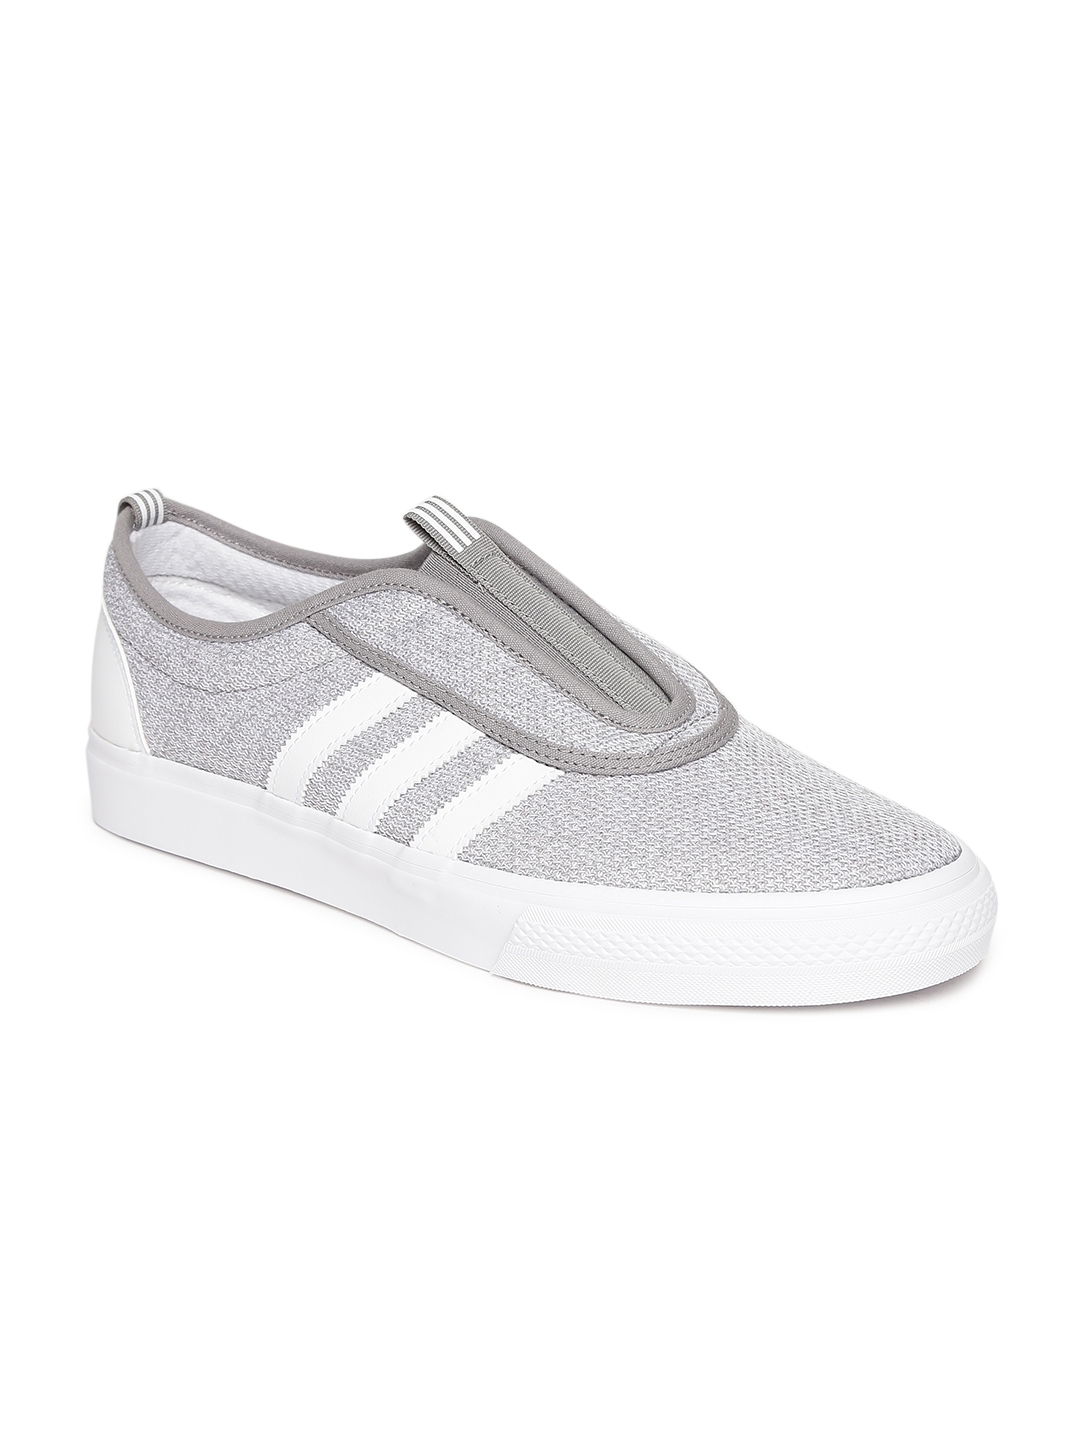 Buy Unisex ADIDAS Originals Grey ADI EASE KUNG Sports Shoes - Casual Shoes for Unisex 3097902 | Myntra